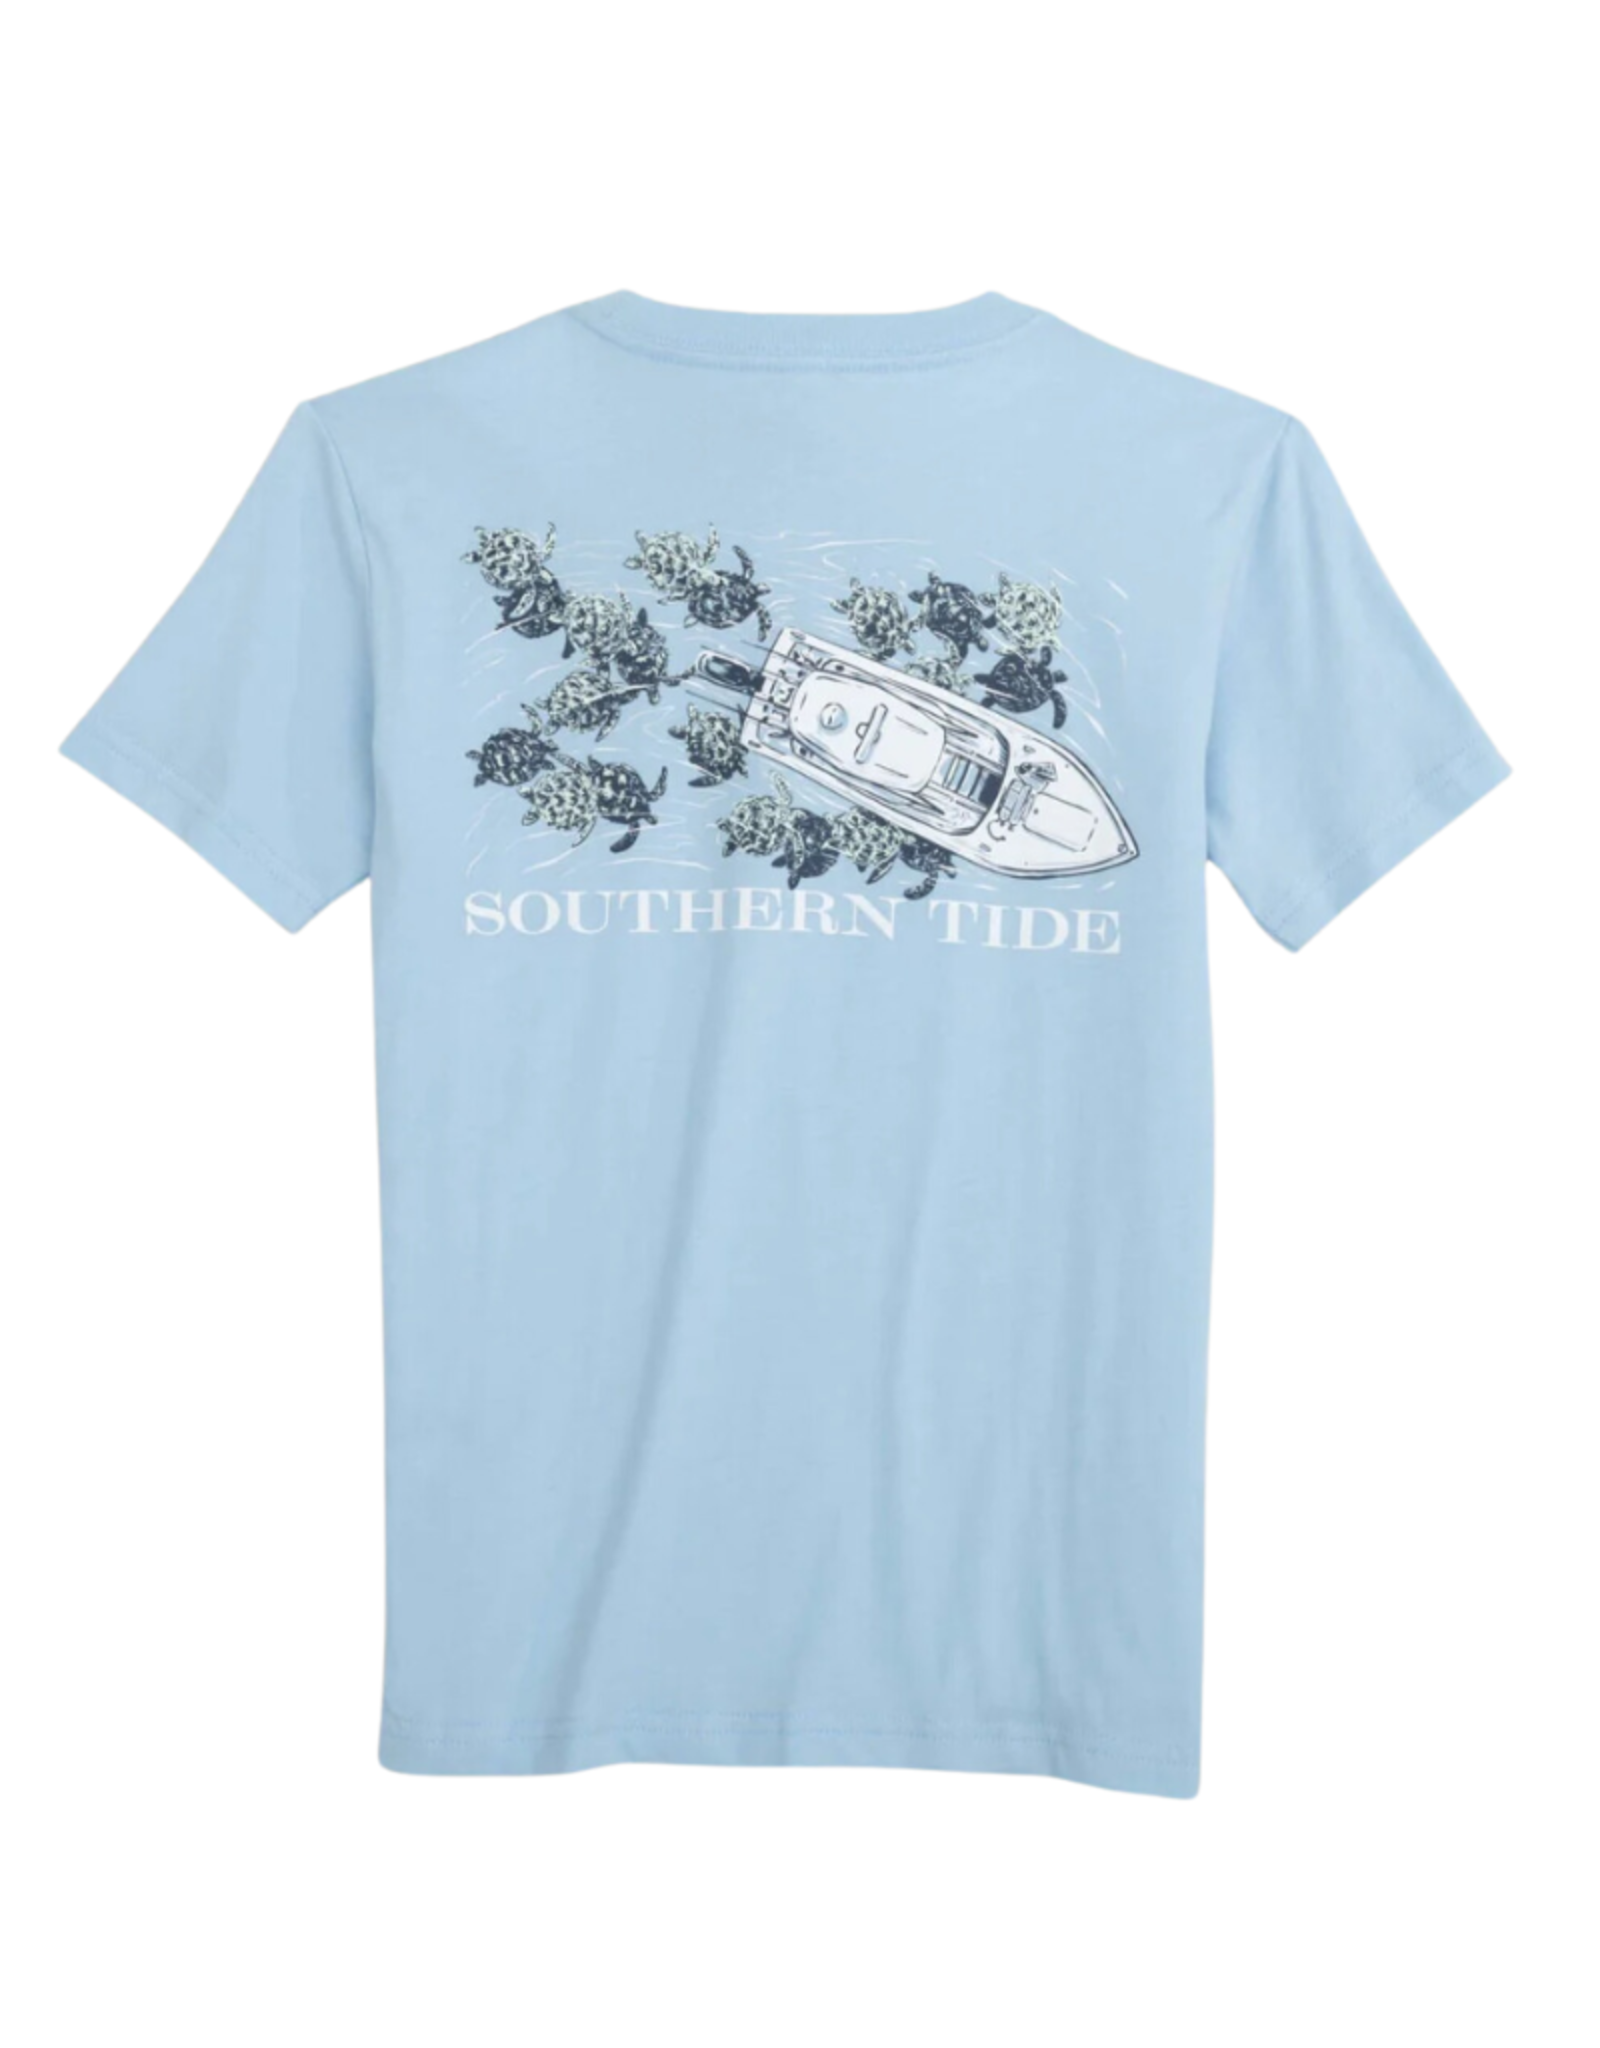 Southern Tide Clearwater Blue Yatchs of Turtles Tee